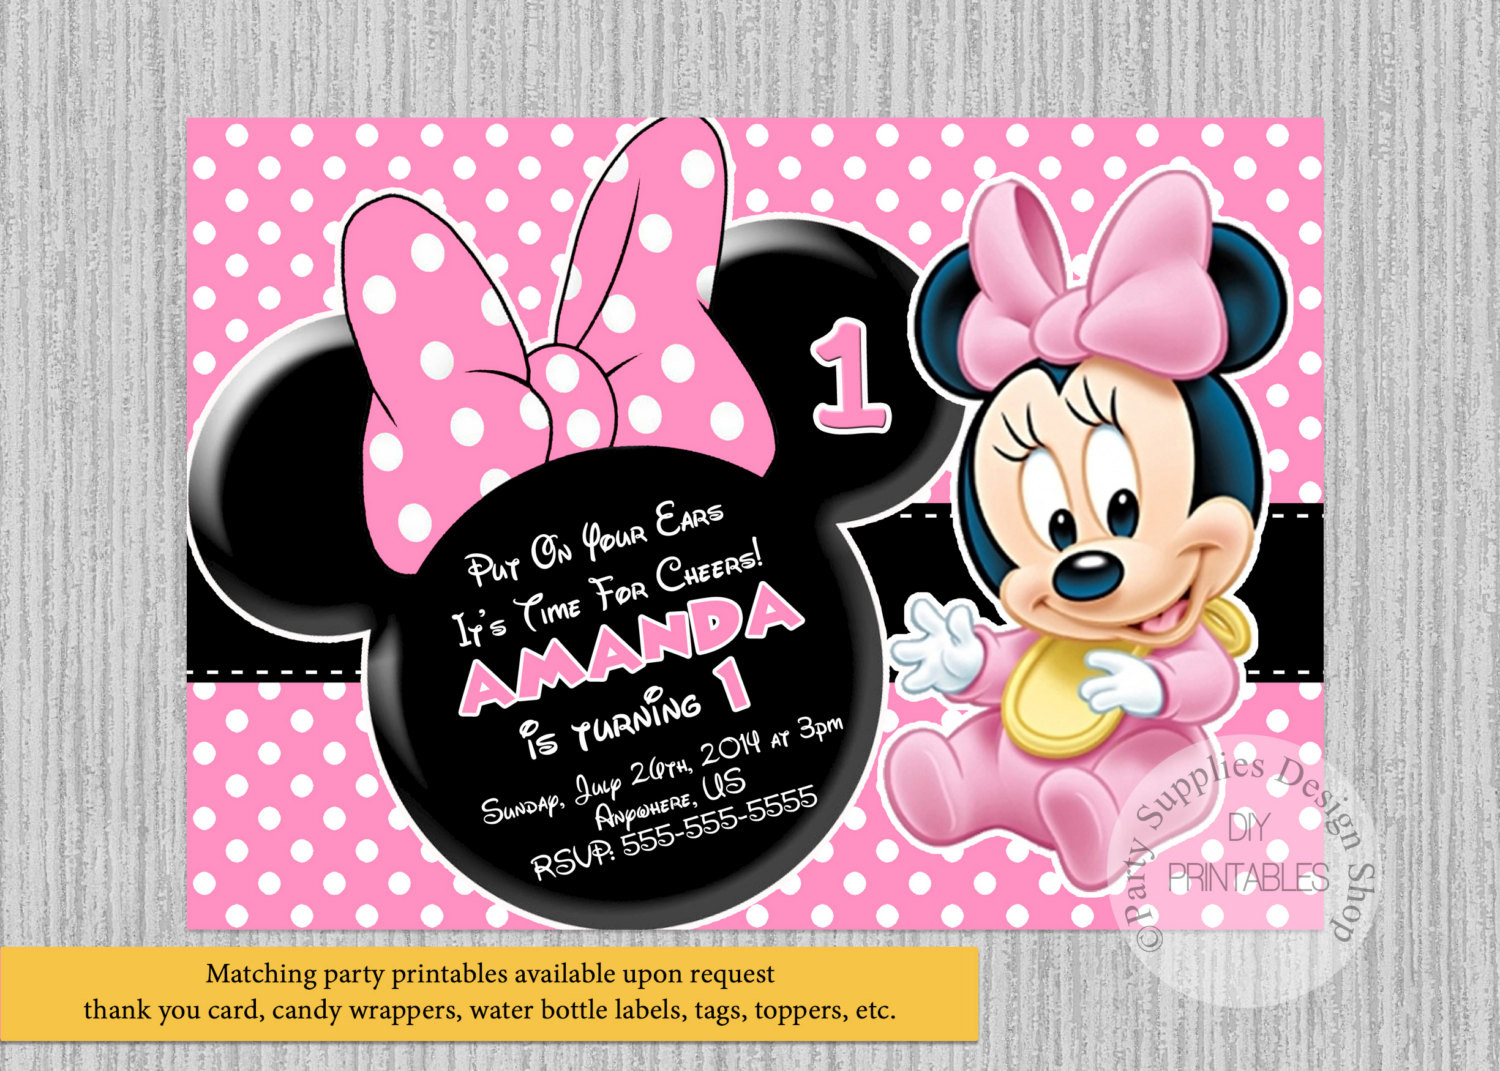 Baby Minnie Mouse 1st Birthday Invitations
 Cute Baby Minnie Mouse Birthday Invitations Baby Minnie